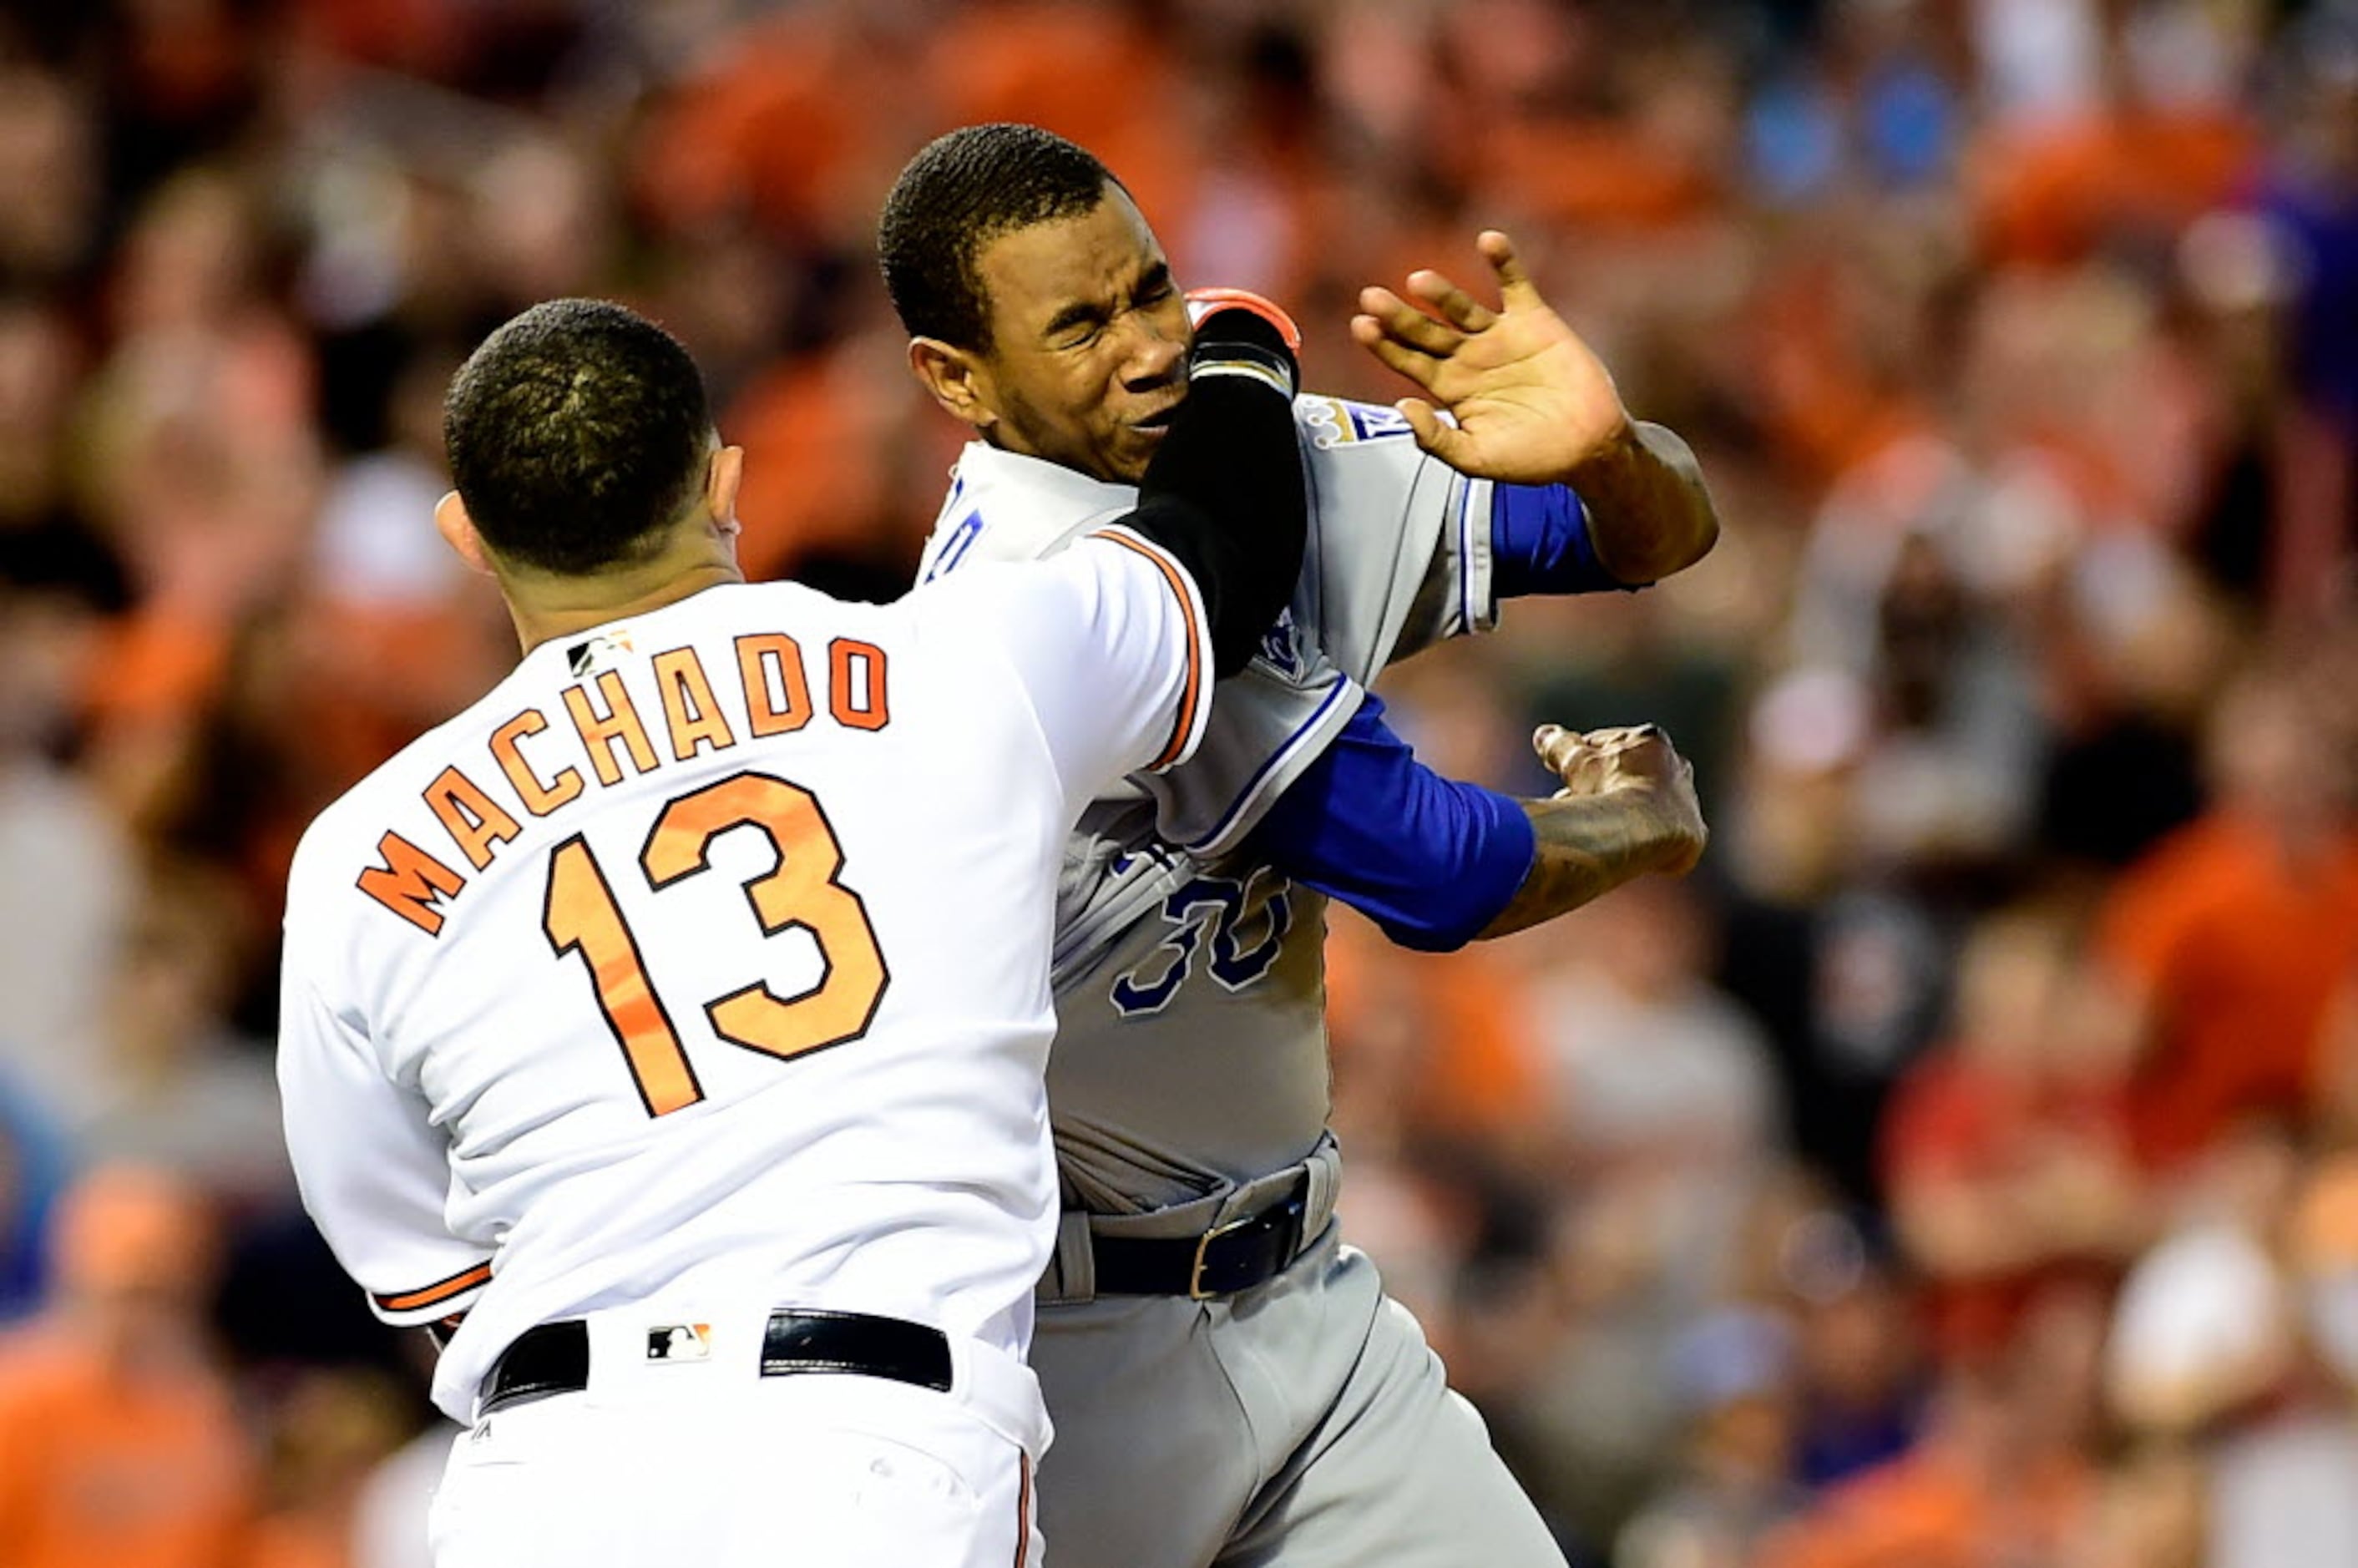 Dallas-area man who made shirt commemorating Odor's punch makes another for  Machado's